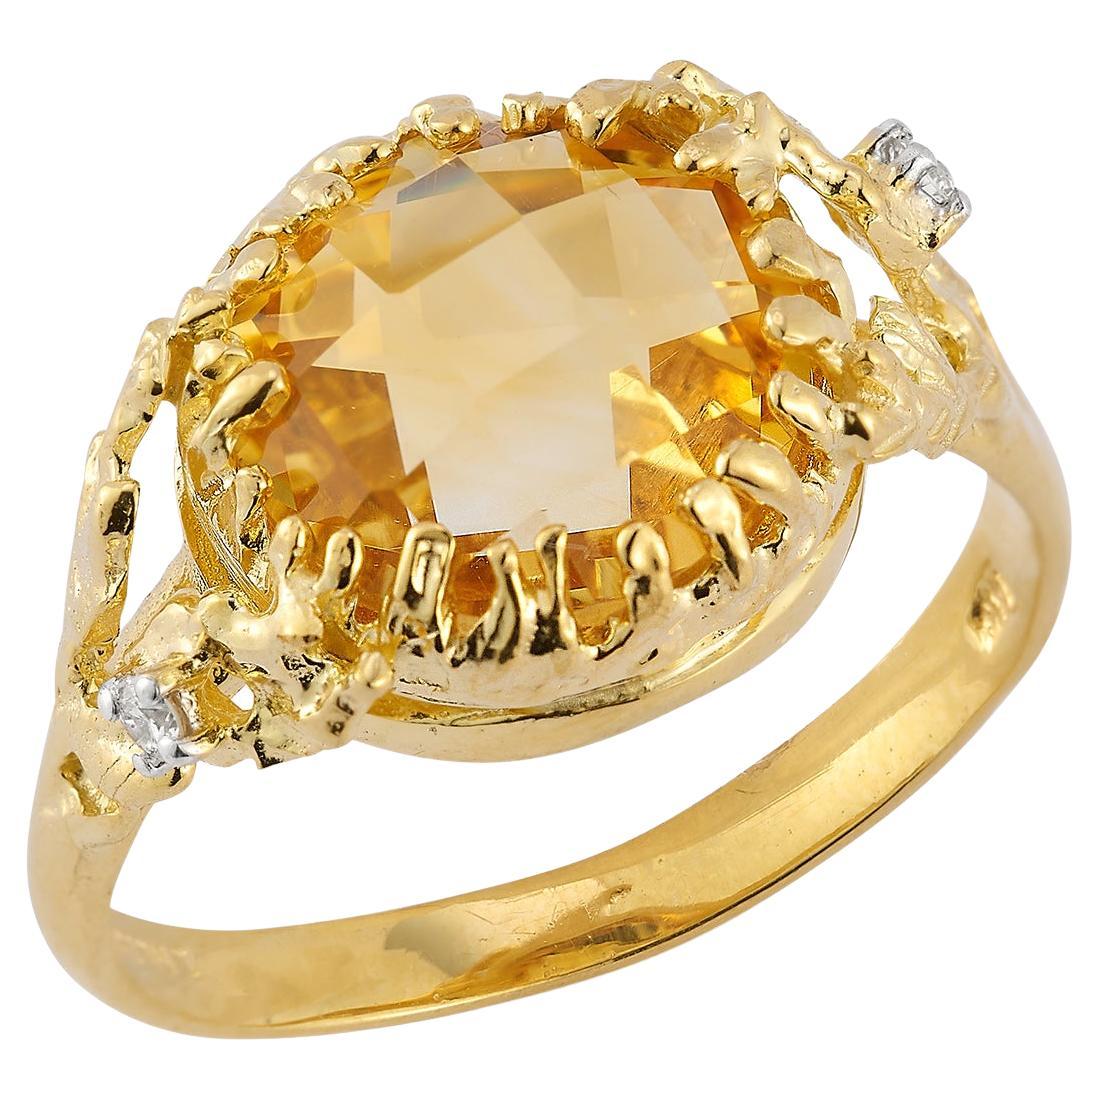 For Sale:  Hand-Crafted 14K Gold 0.03 ct. tw. Diamond & 3.35CT Citrine Color Stone Ring